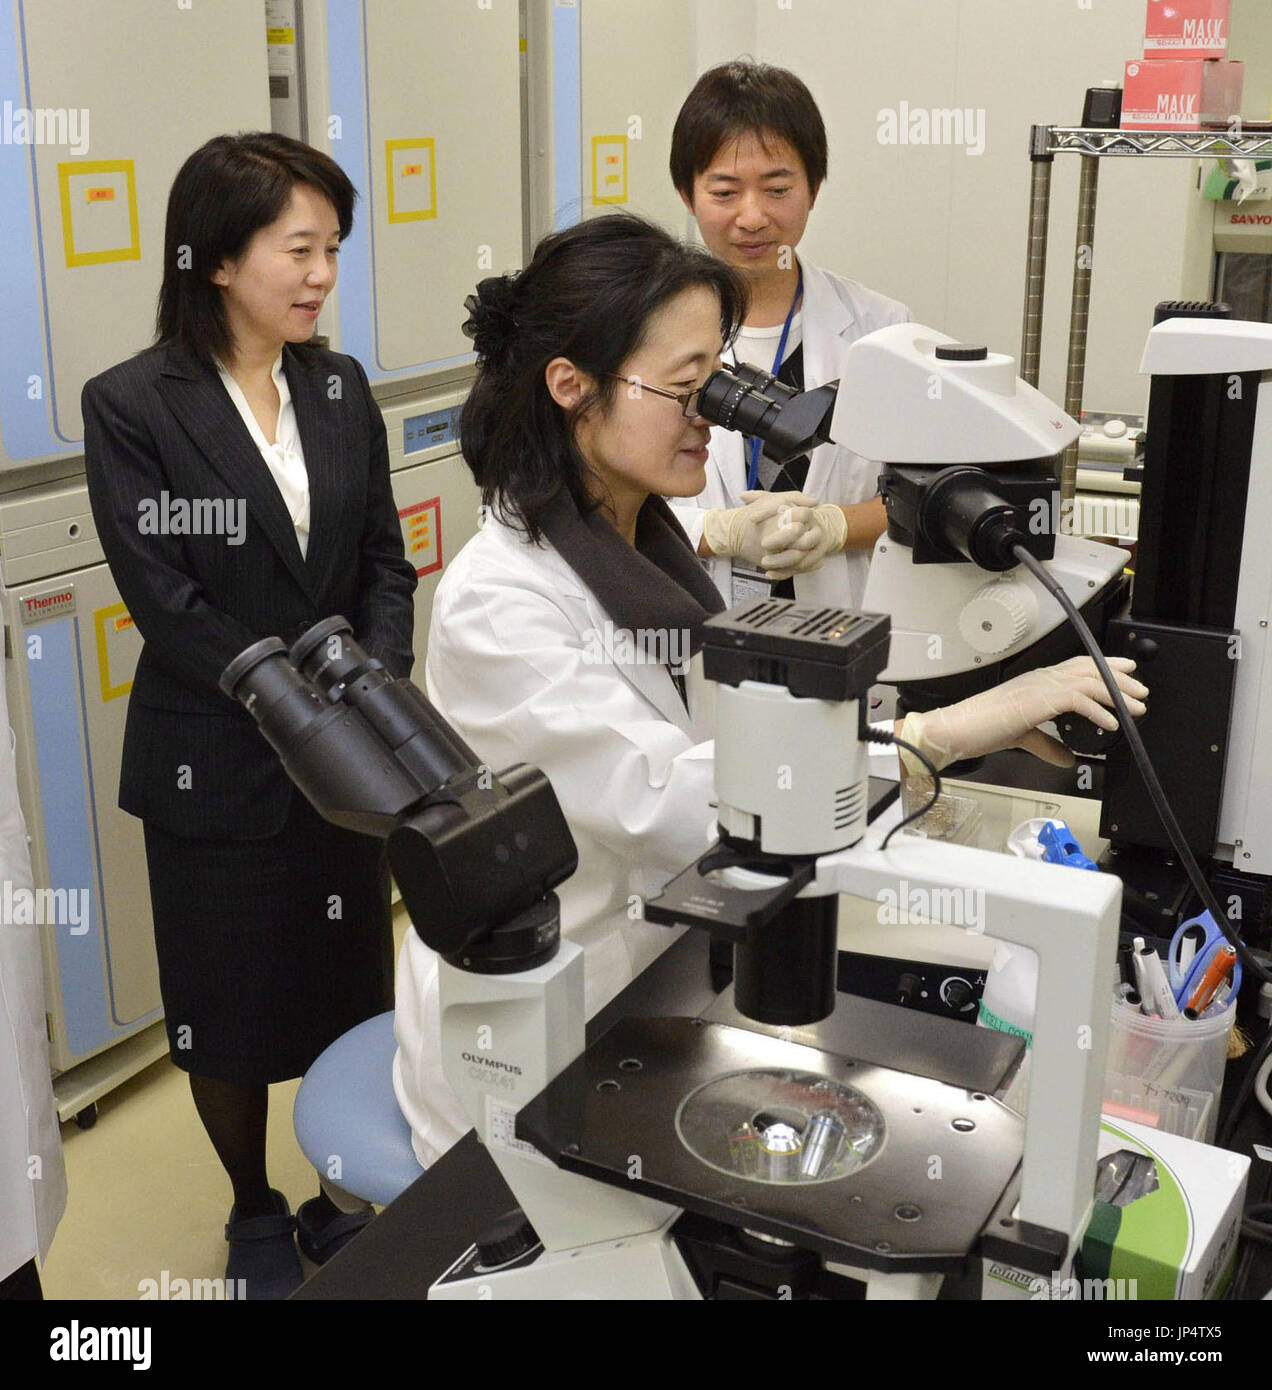 OSAKA, Japan - Masayo Takahashi (L), project leader at Riken Center for Developmental Biology, inspects an experiment at Riken's stem cell culture laboratory in Kobe, western Japan, in February 2013. A Japanese team has recently conducted the world's first surgery to implant tissue derived from induced pluripotent stem cells into a human body as part of the clinical study led by Takahashi and others. (Kyodo) Stock Photo